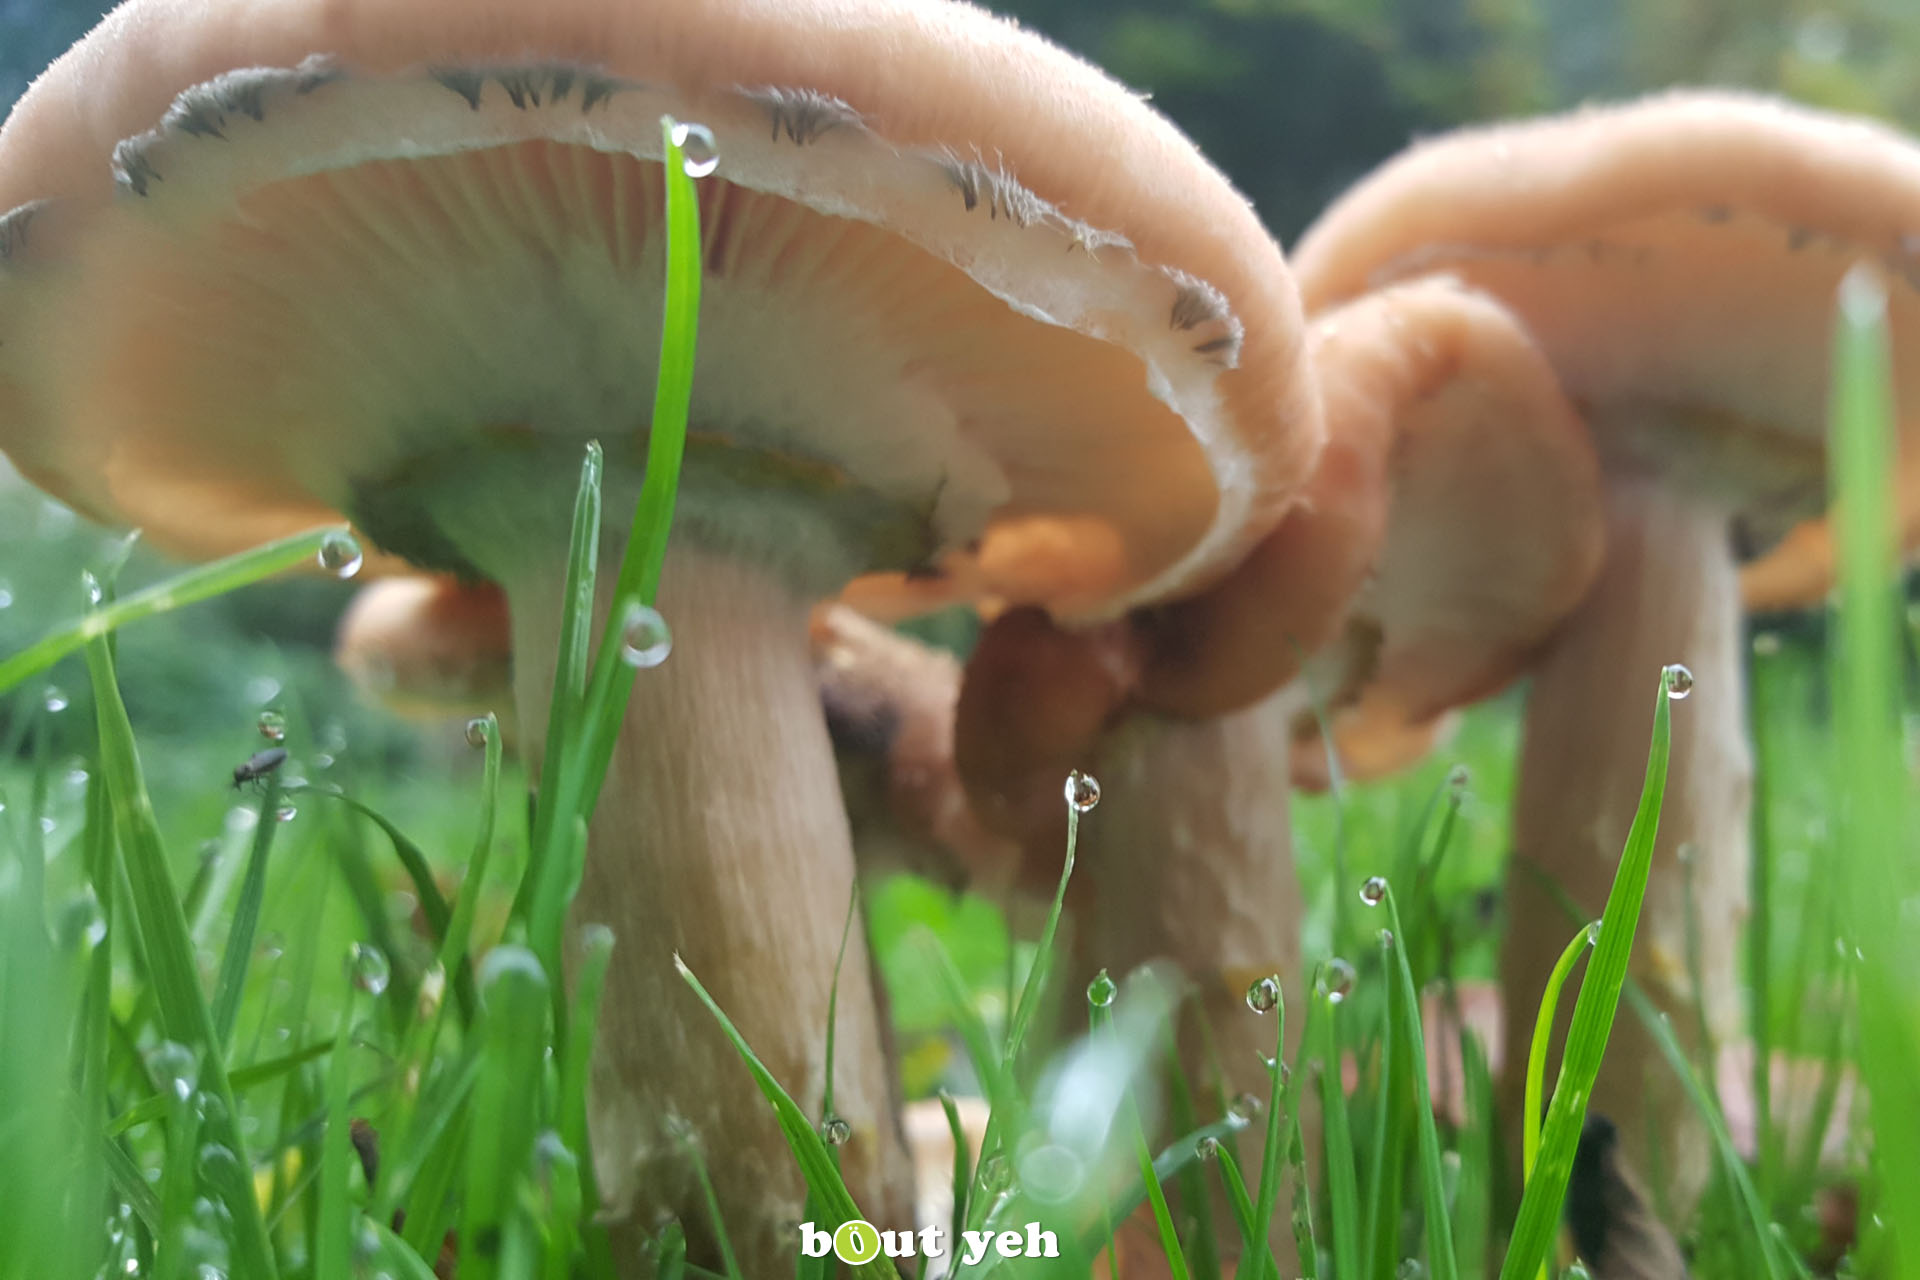 Photo of mushrooms growing in dew tipped grass.